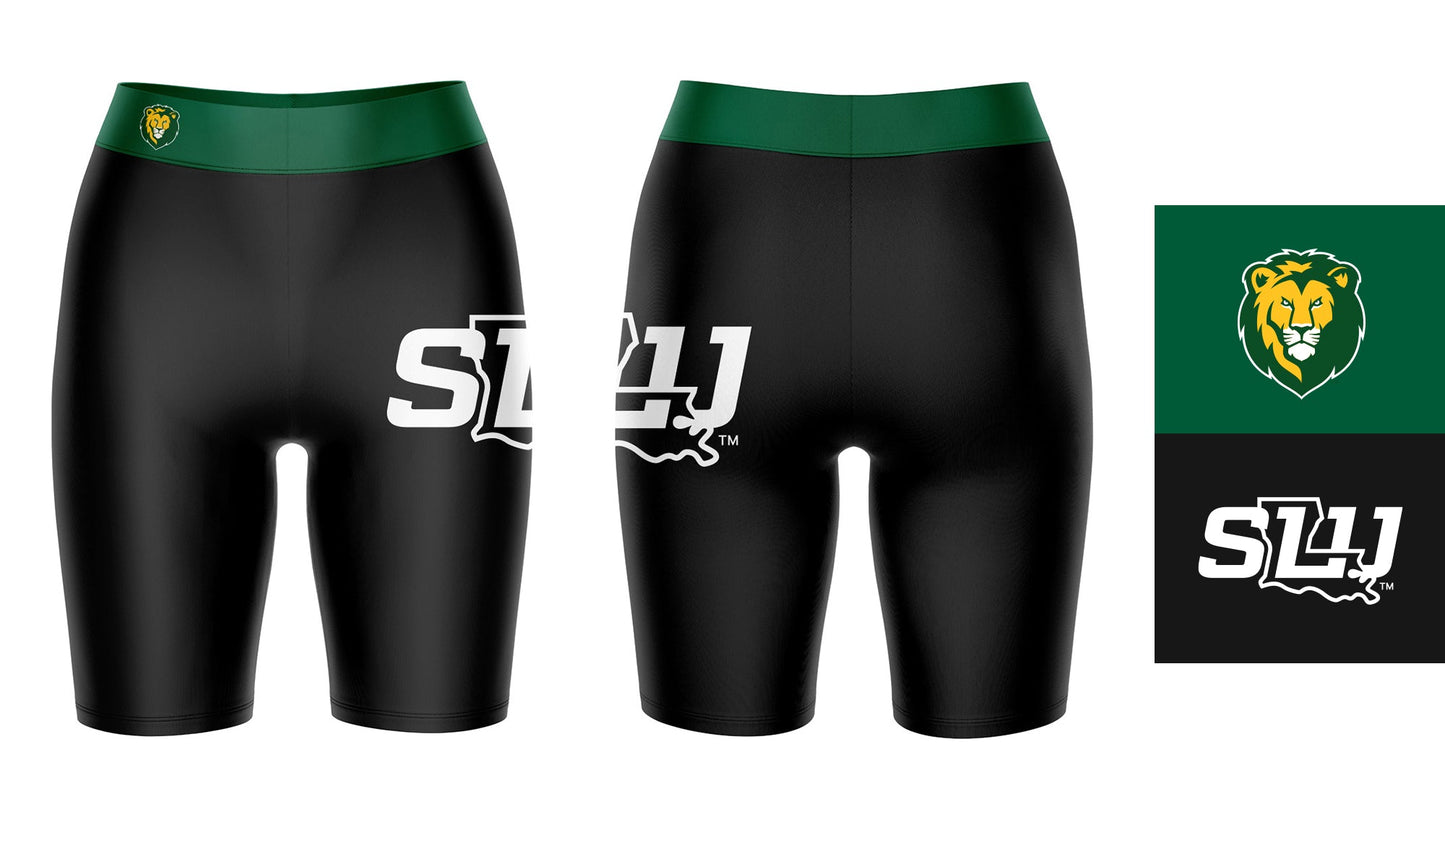 Southeastern Lions Game Day Logo on Thigh and Waistband Black and Green Womens Bike Shorts by Vive La Fete